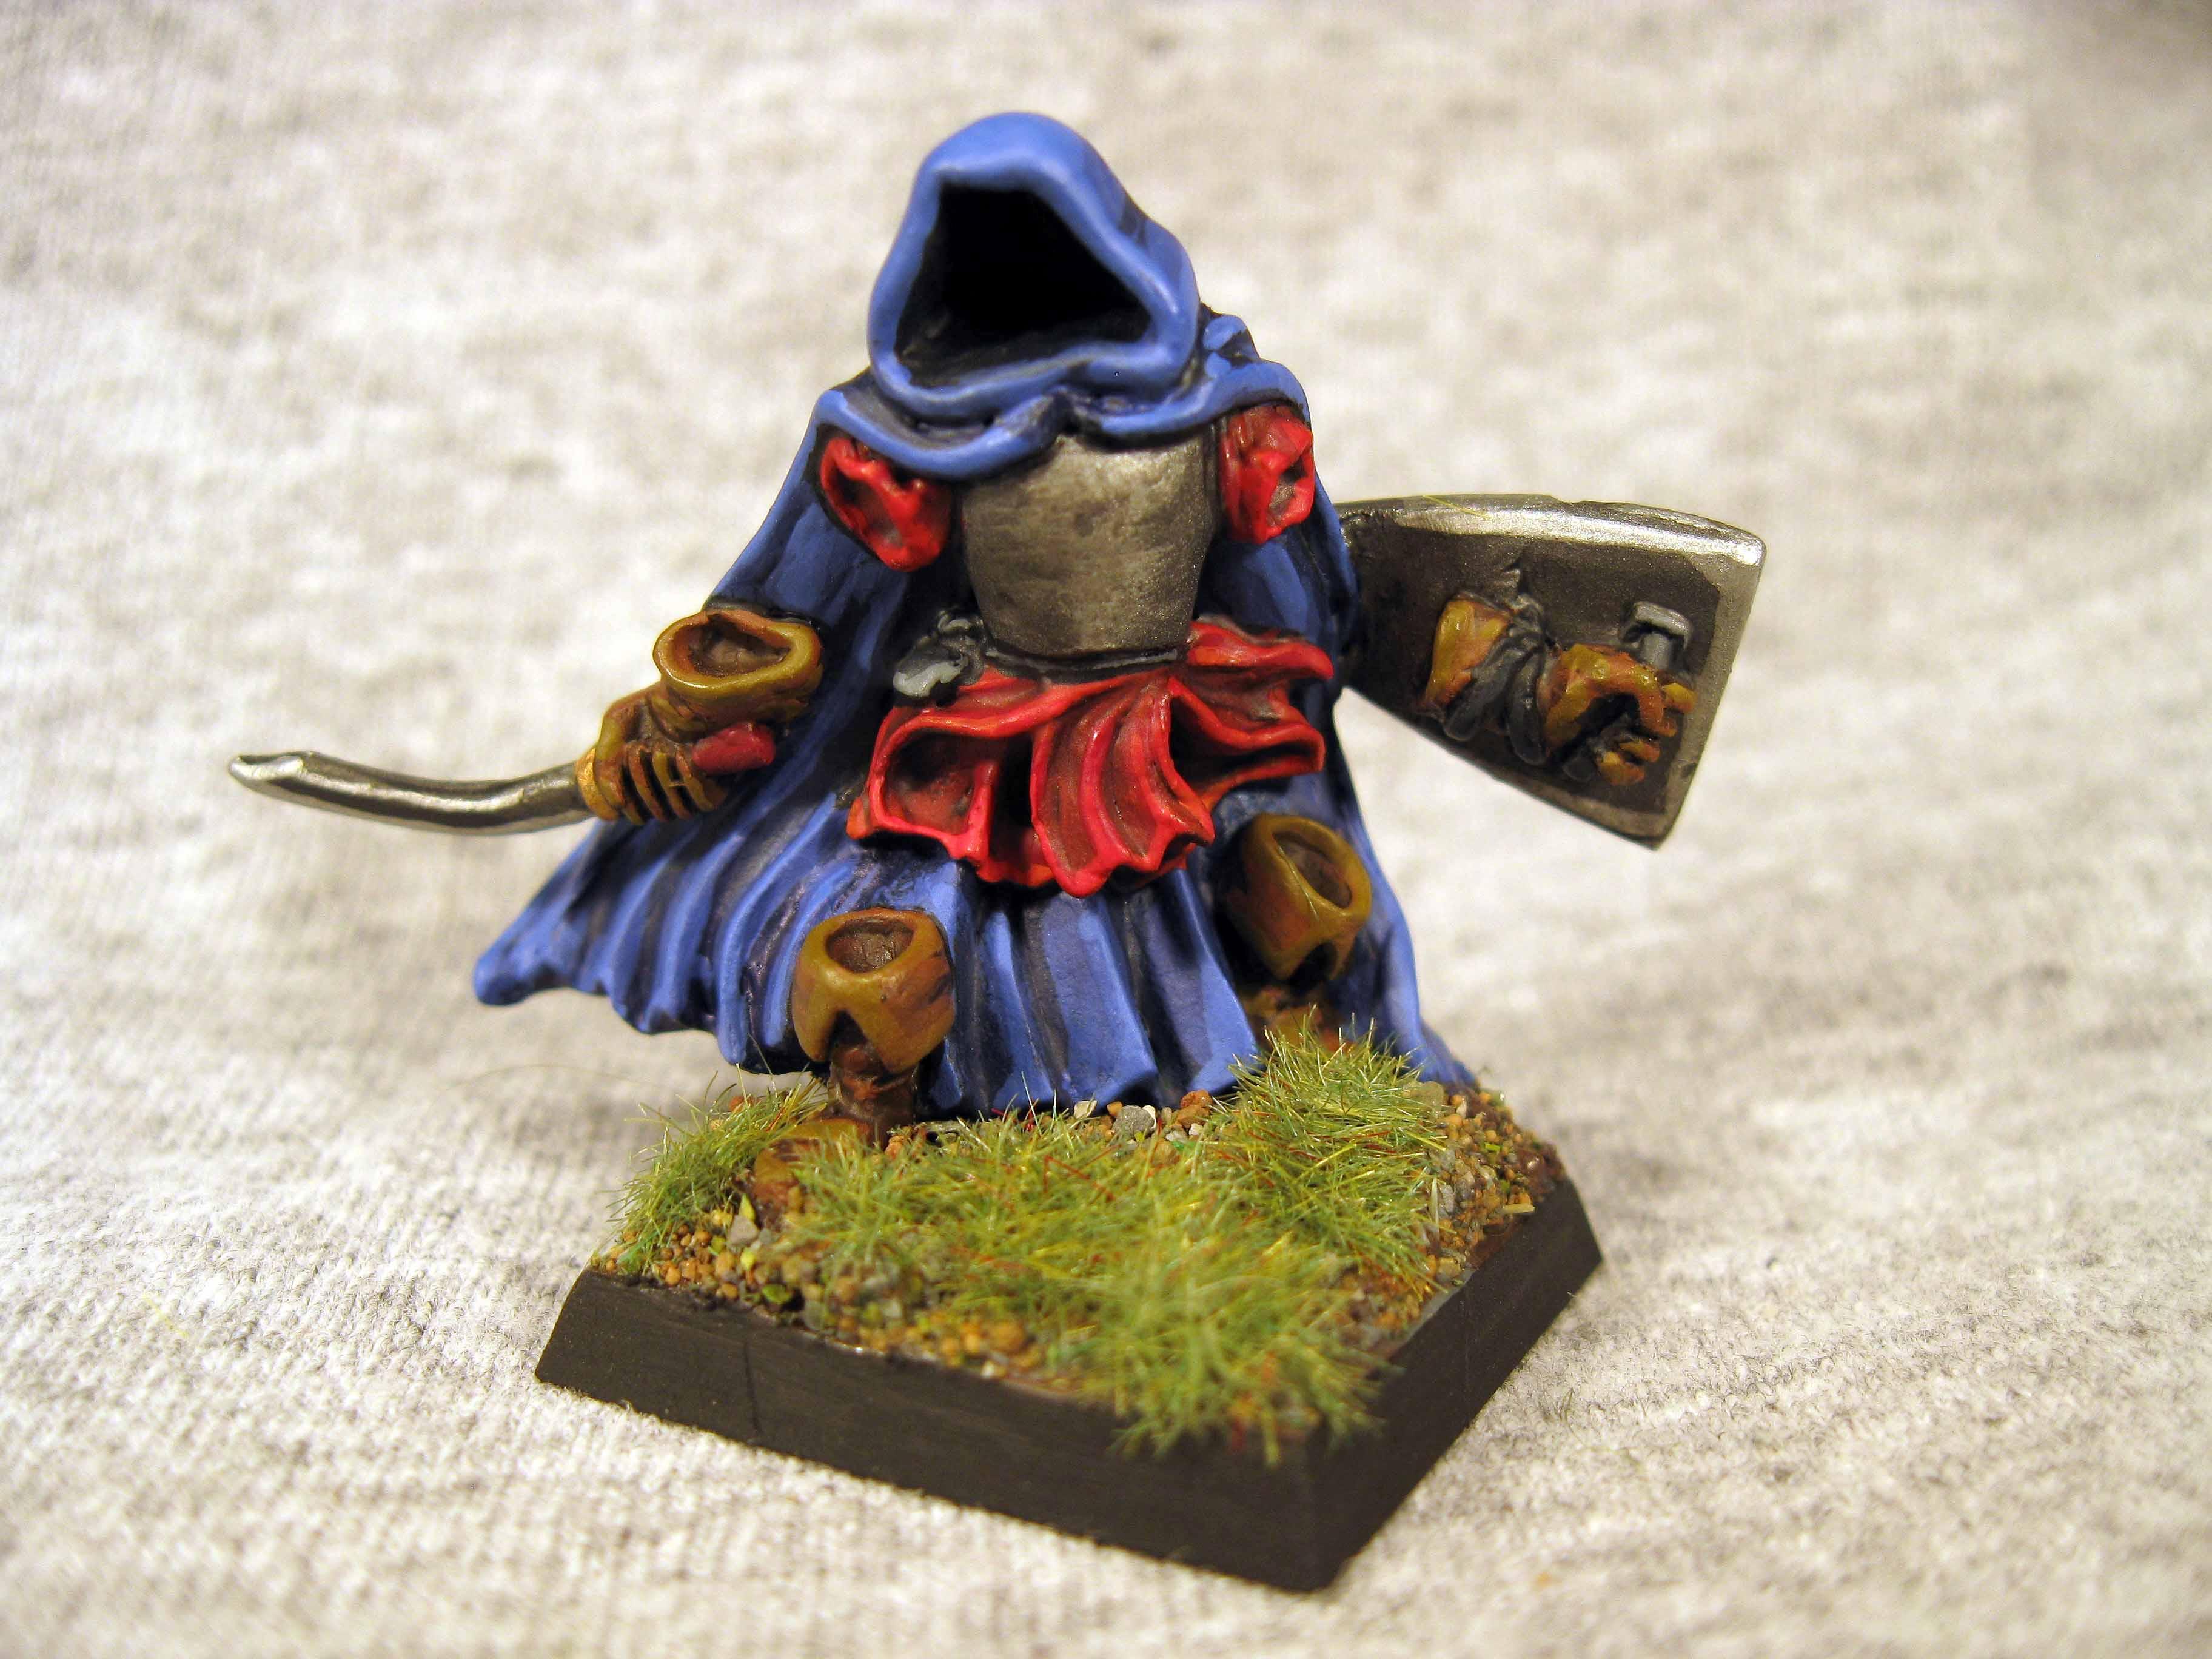 Invisible, Pathfinders, Pro Painted, Reaper, Reaper Miniatures, Reaper Minis, Rpg, Undead, Warhammer Fantasy, Wraith